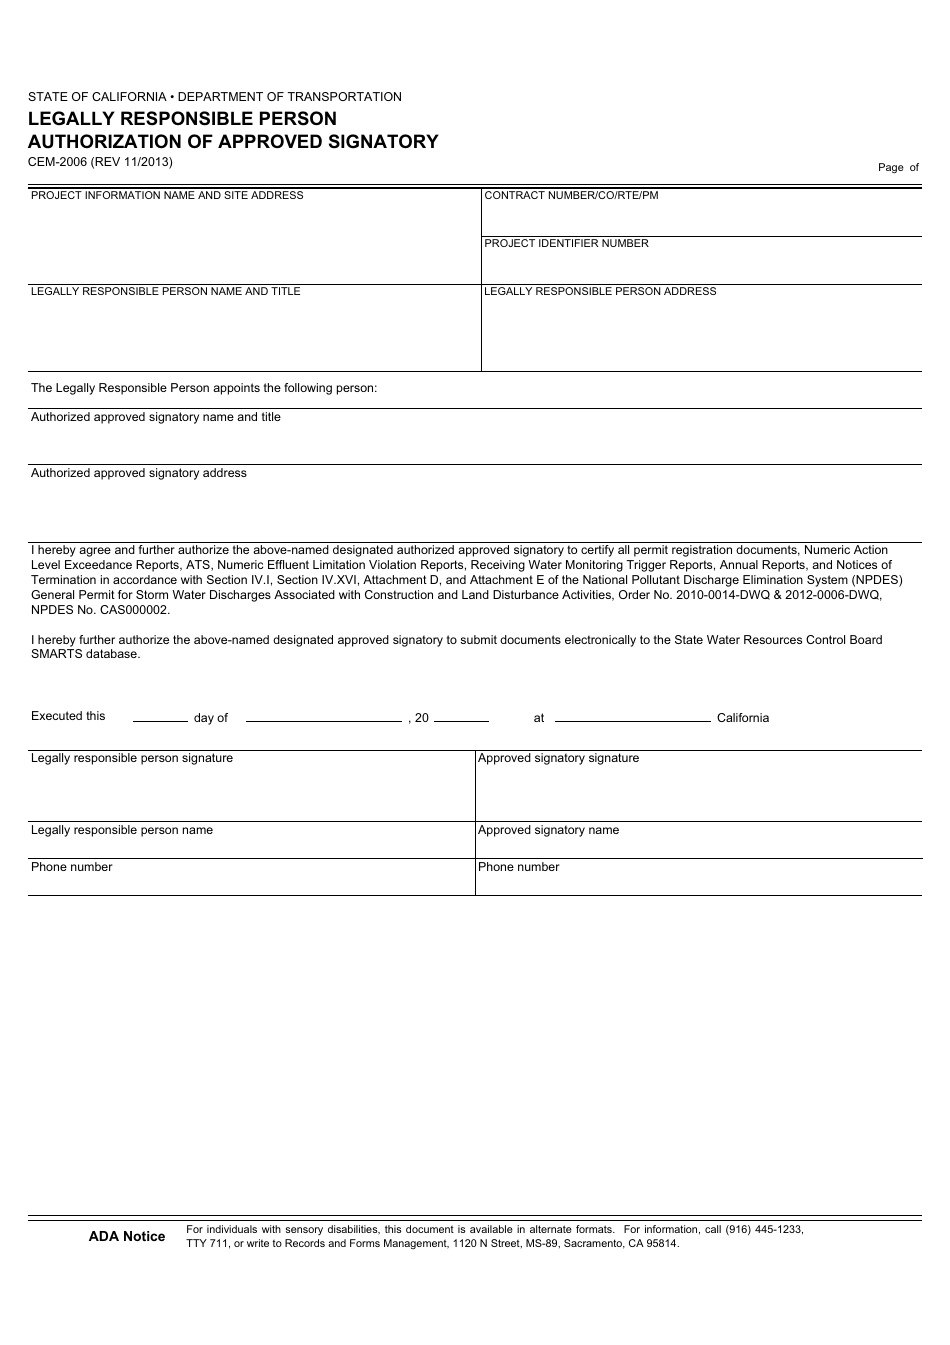 Form CEM-2006 Legally Responsible Person Autnorization of Approved Signatory - California, Page 1